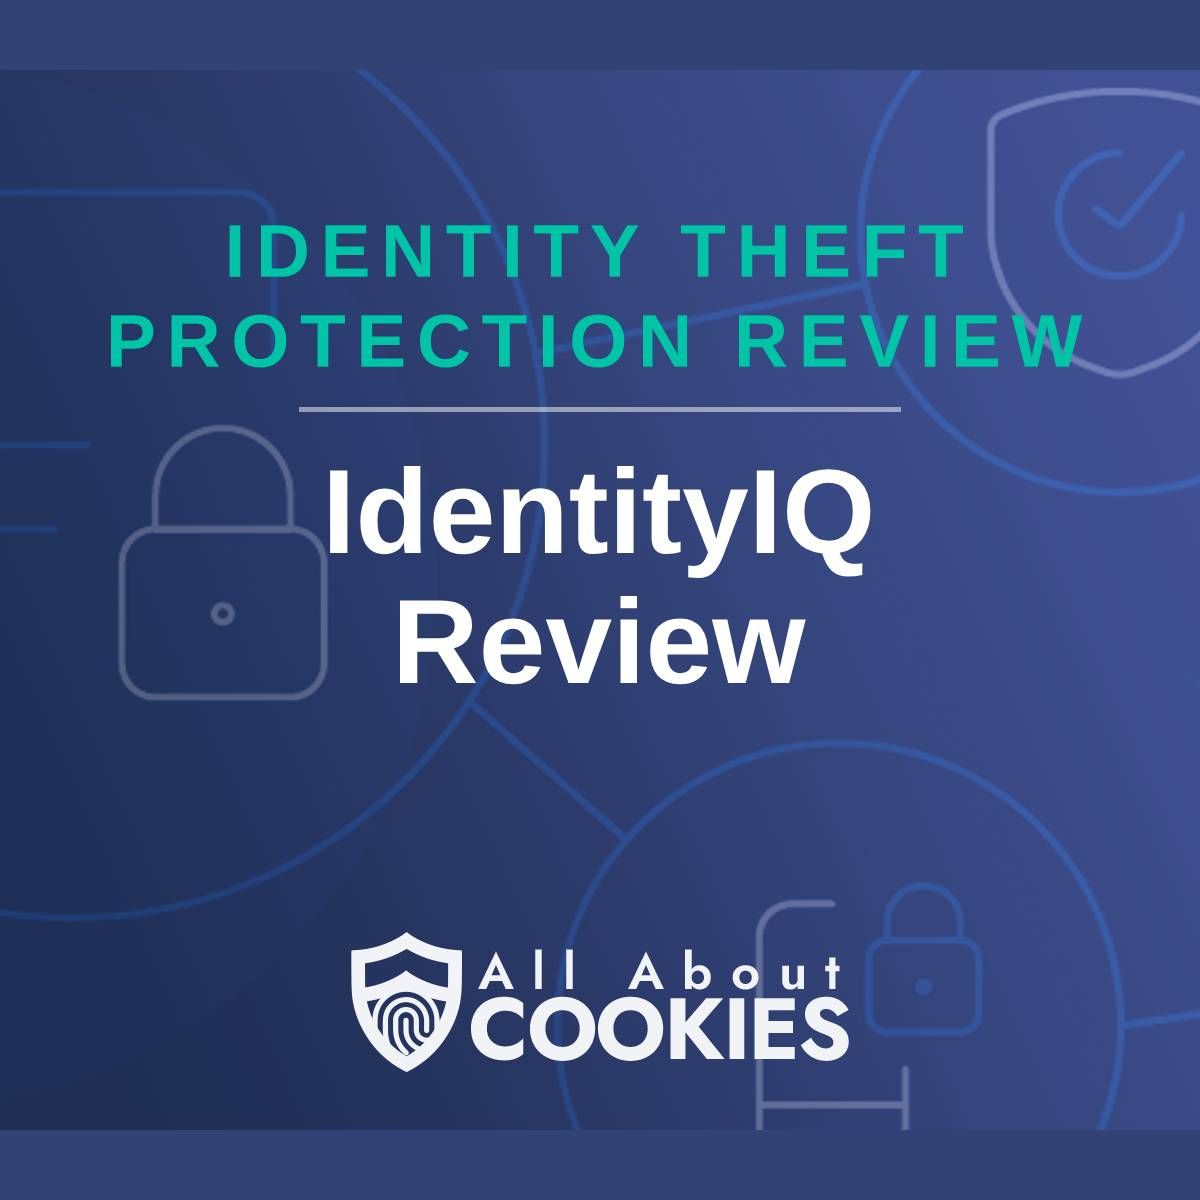 A blue background with images of locks and shields with the text &quot;Identity Theft Protection Review IdentityIQ Review&quot; and the All About Cookies logo. 